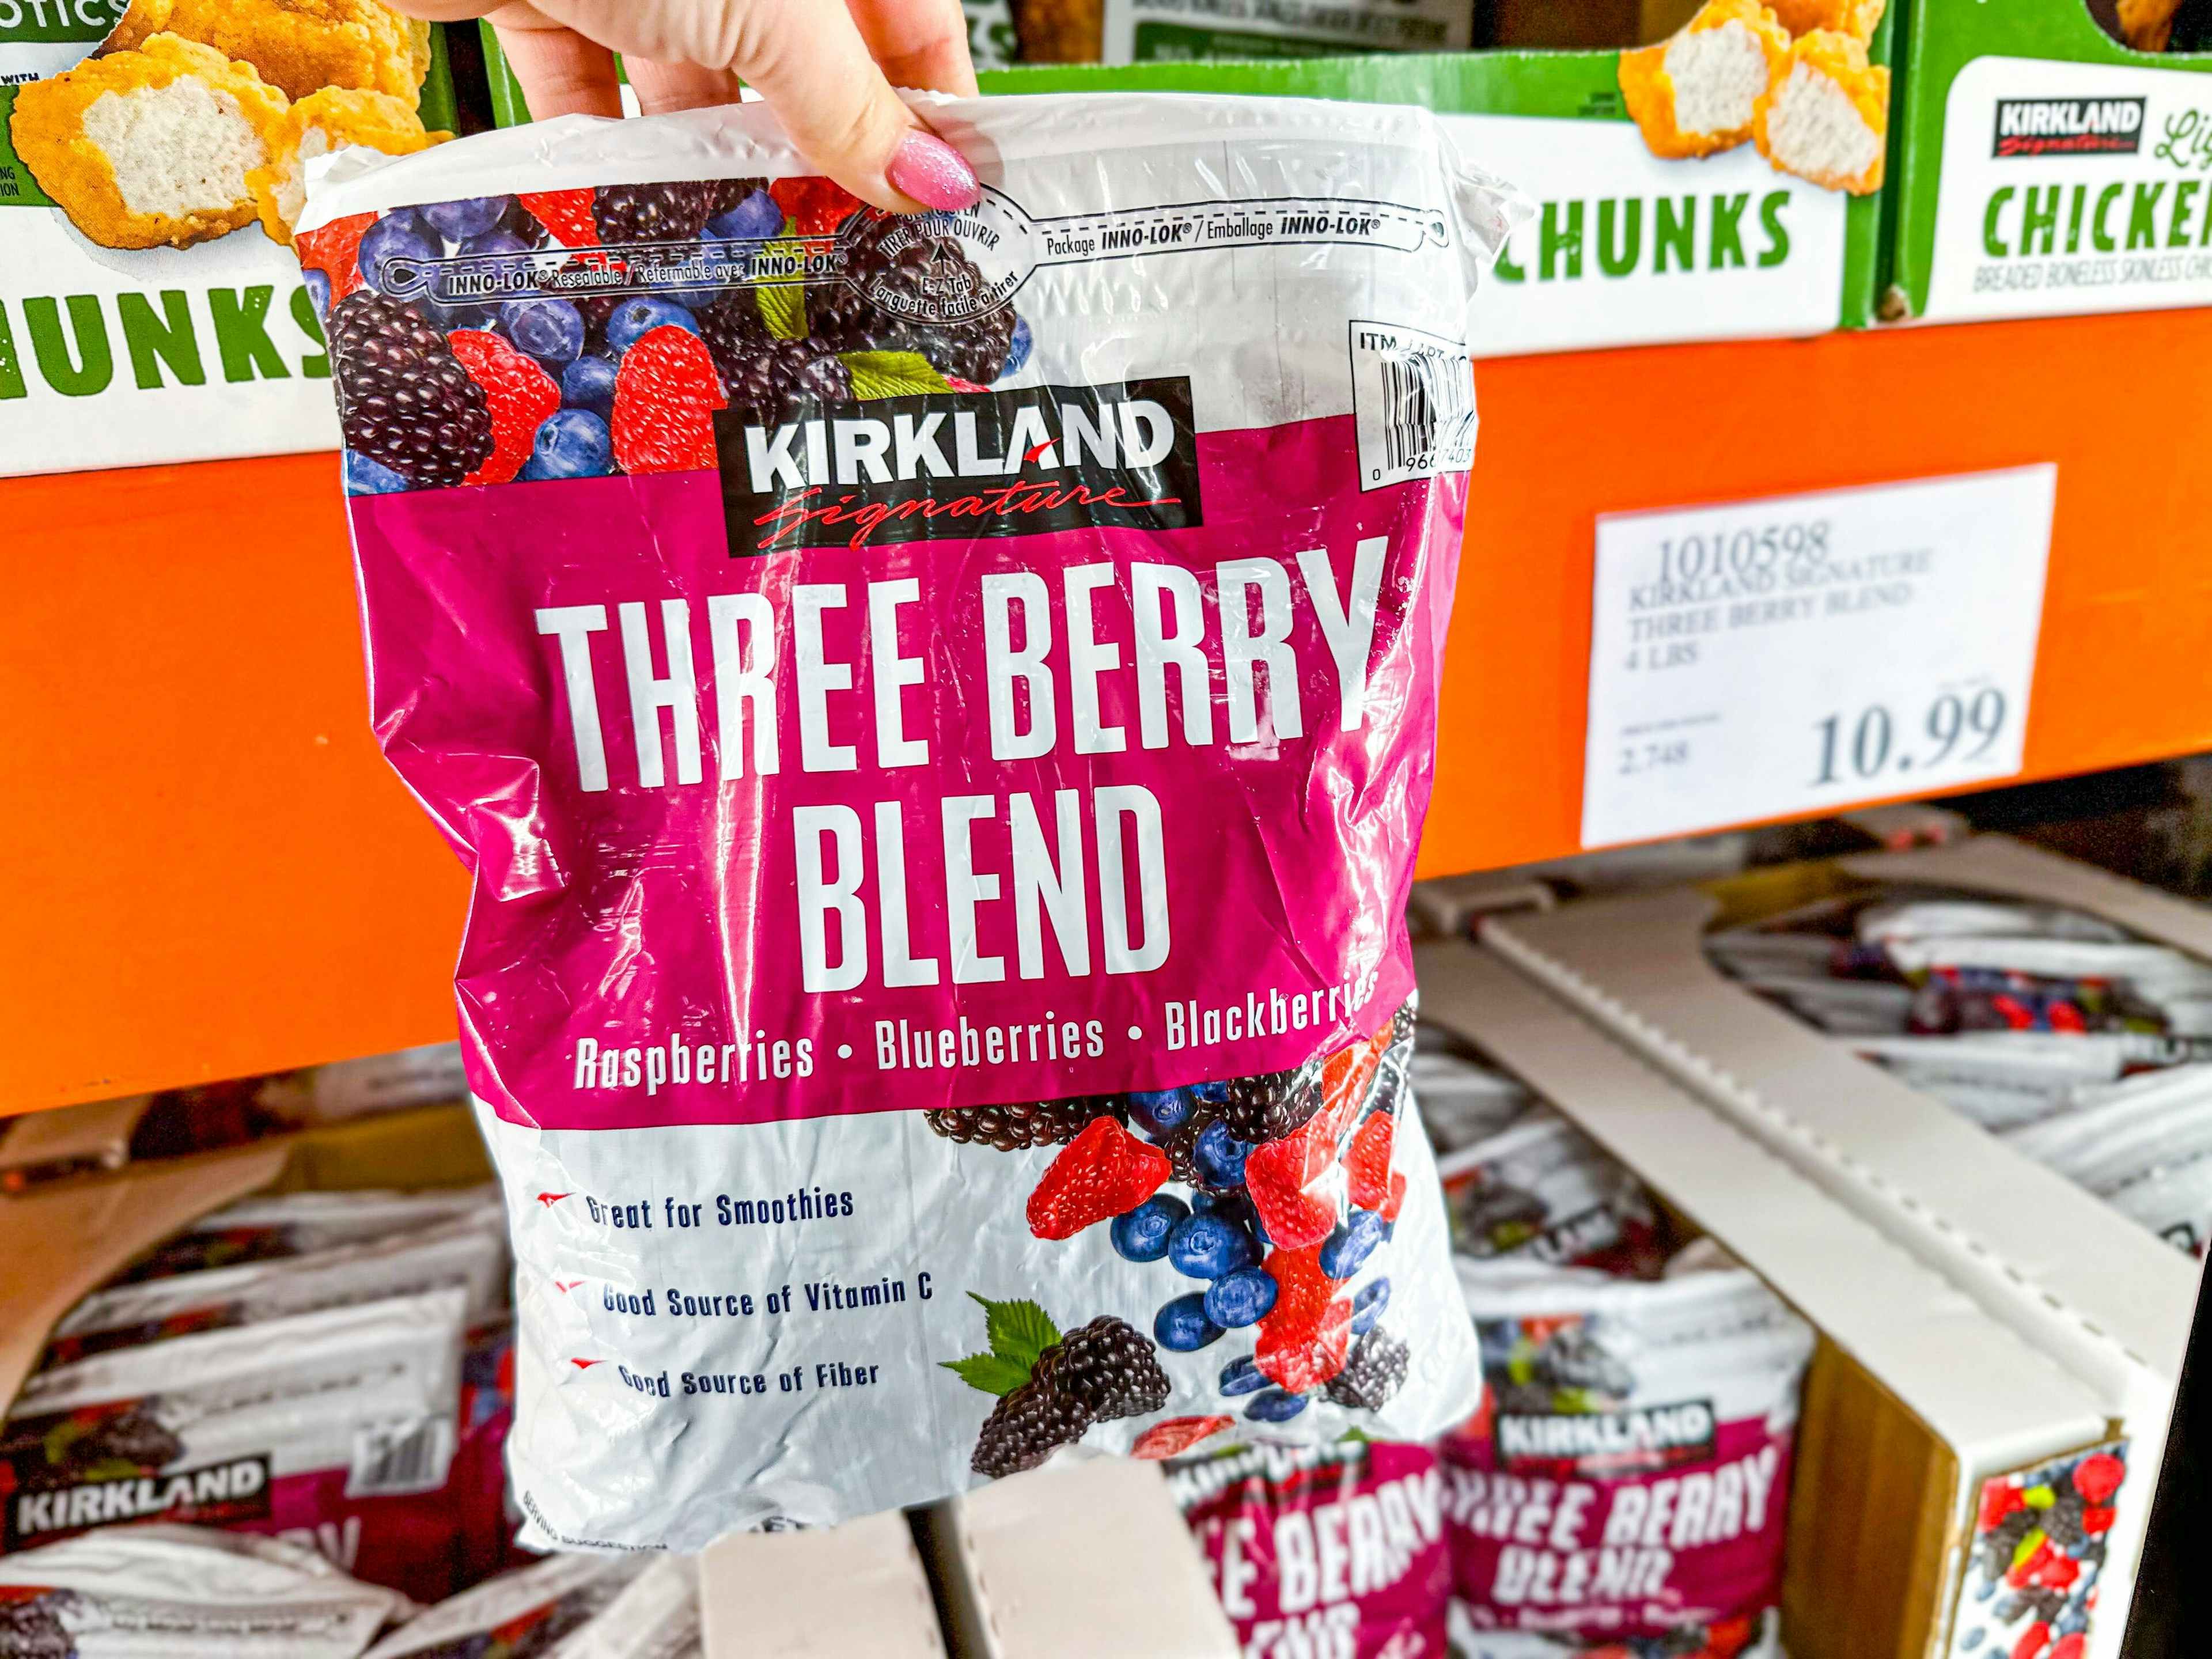 costco-wholesale-prices-going-down-three-berry-blend-kcl